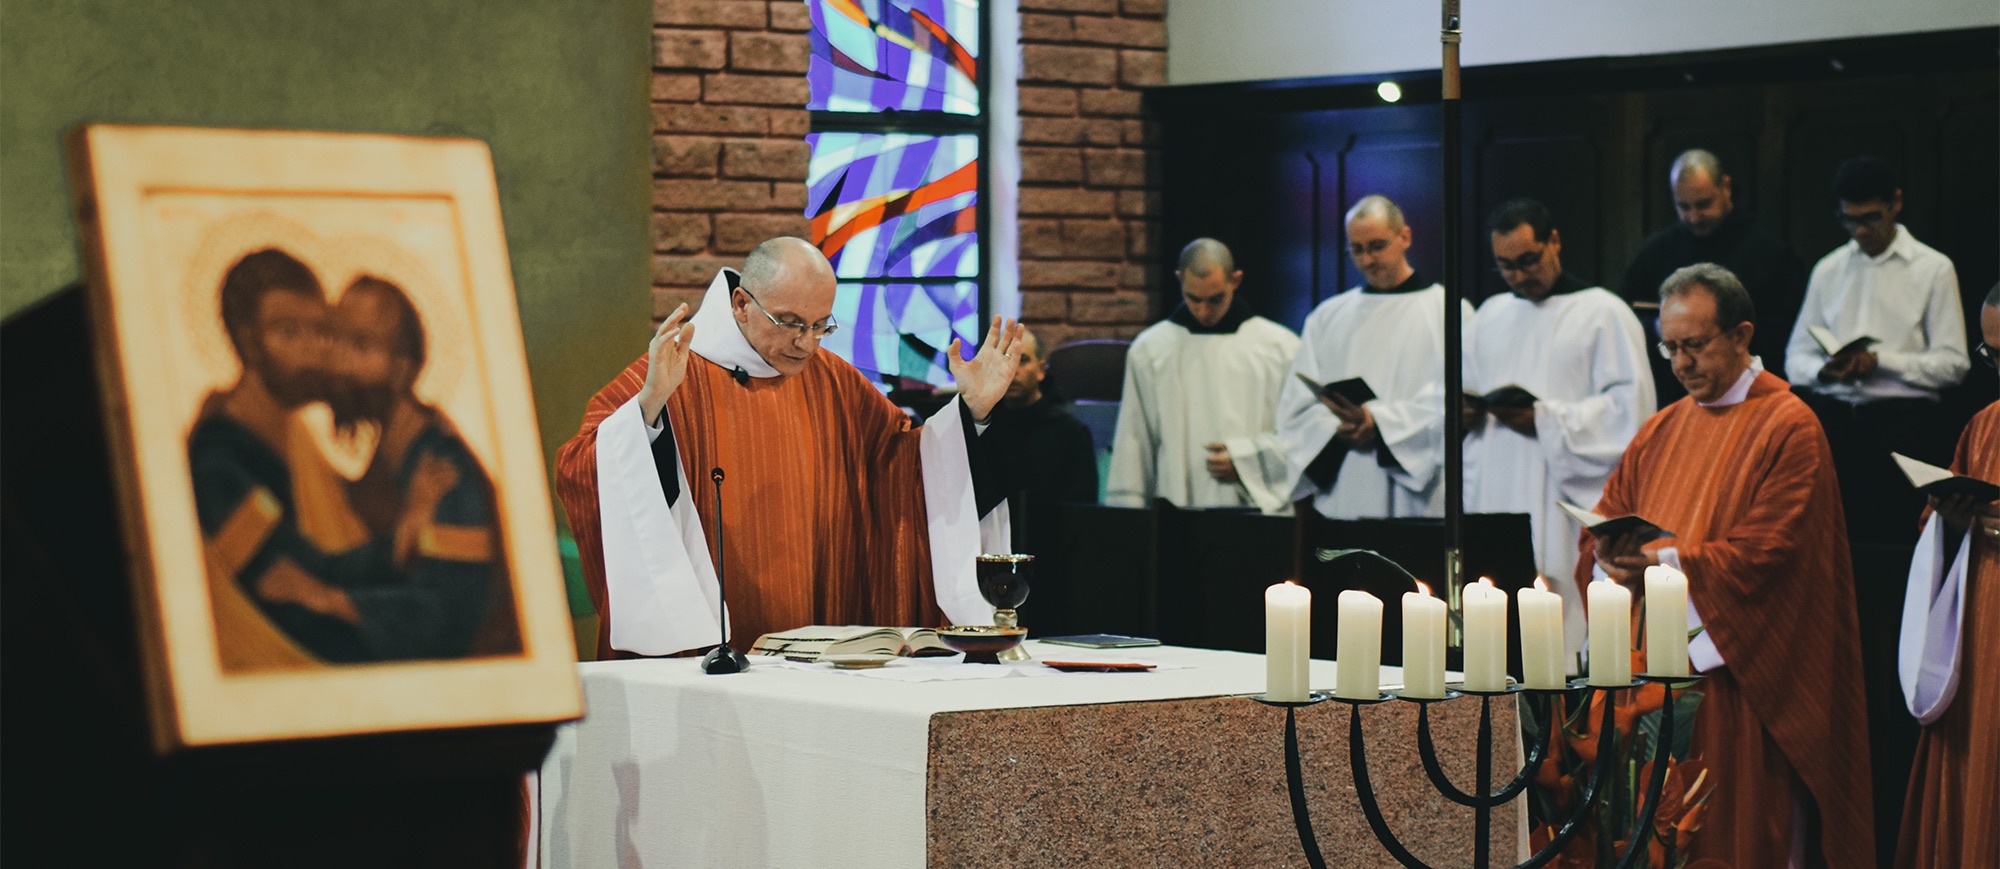 A priest during Consecration 